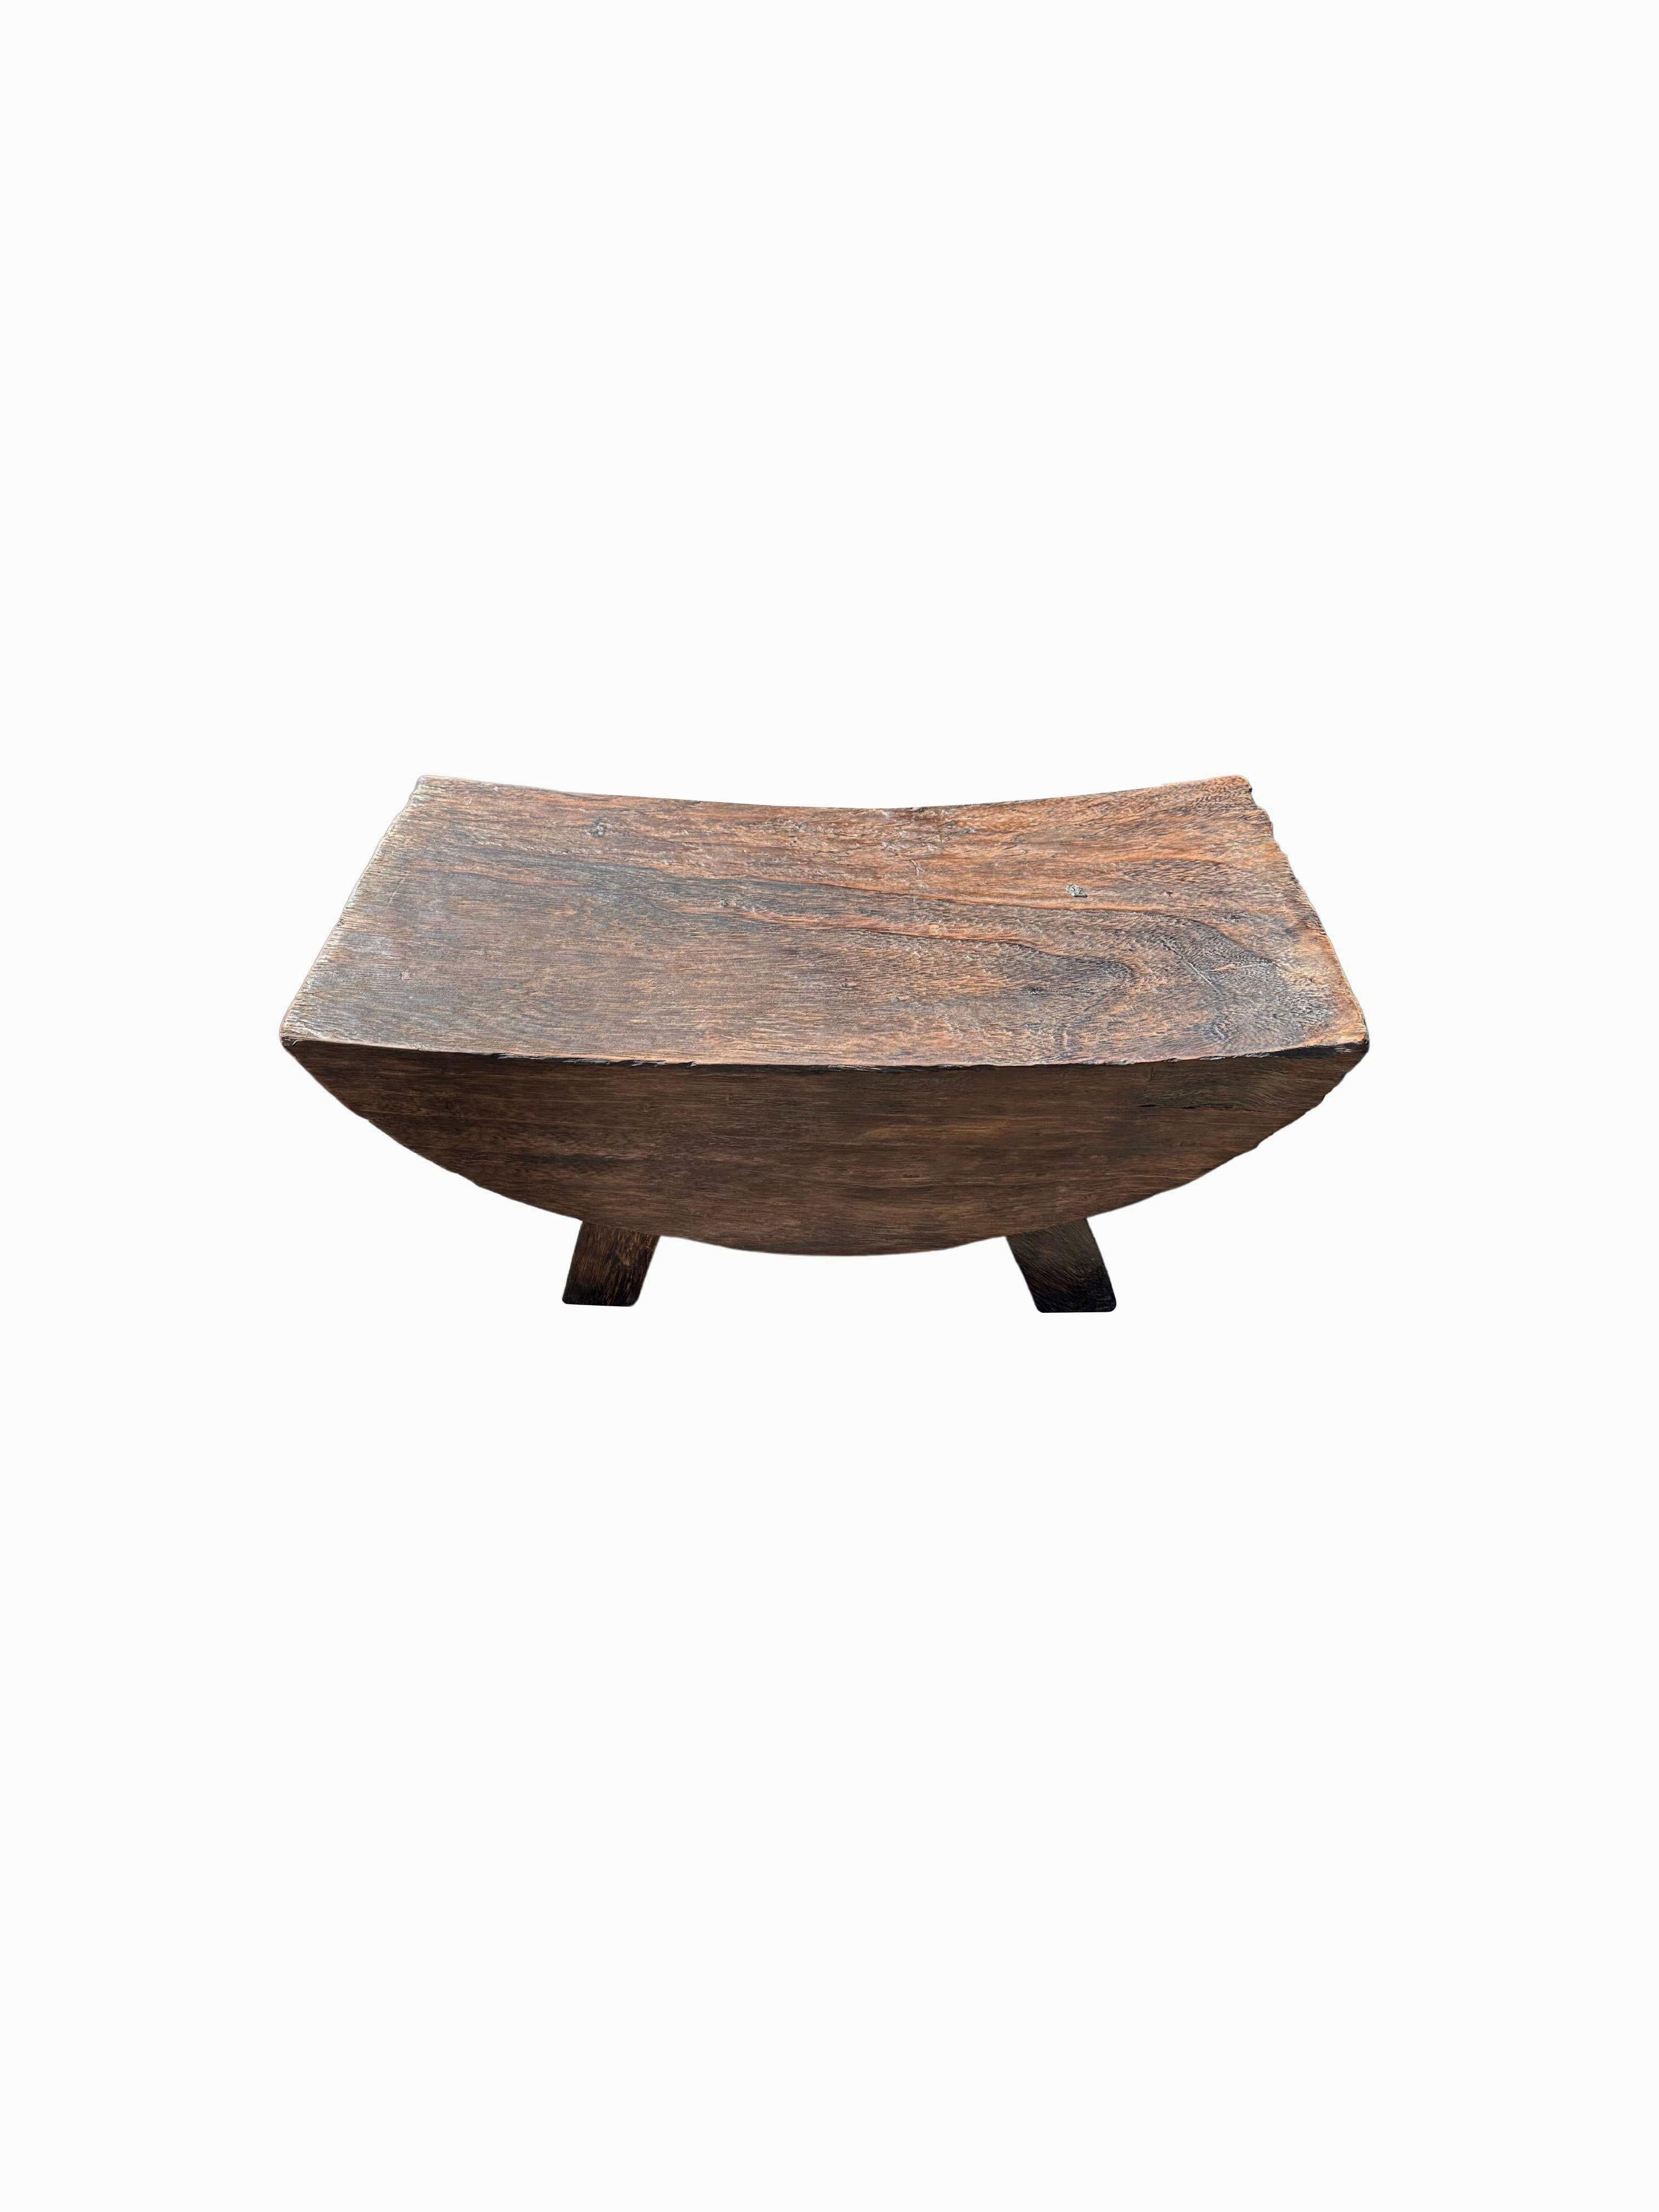 Indonesian Sculptural Stool with Curved Seat Suar Wood  For Sale